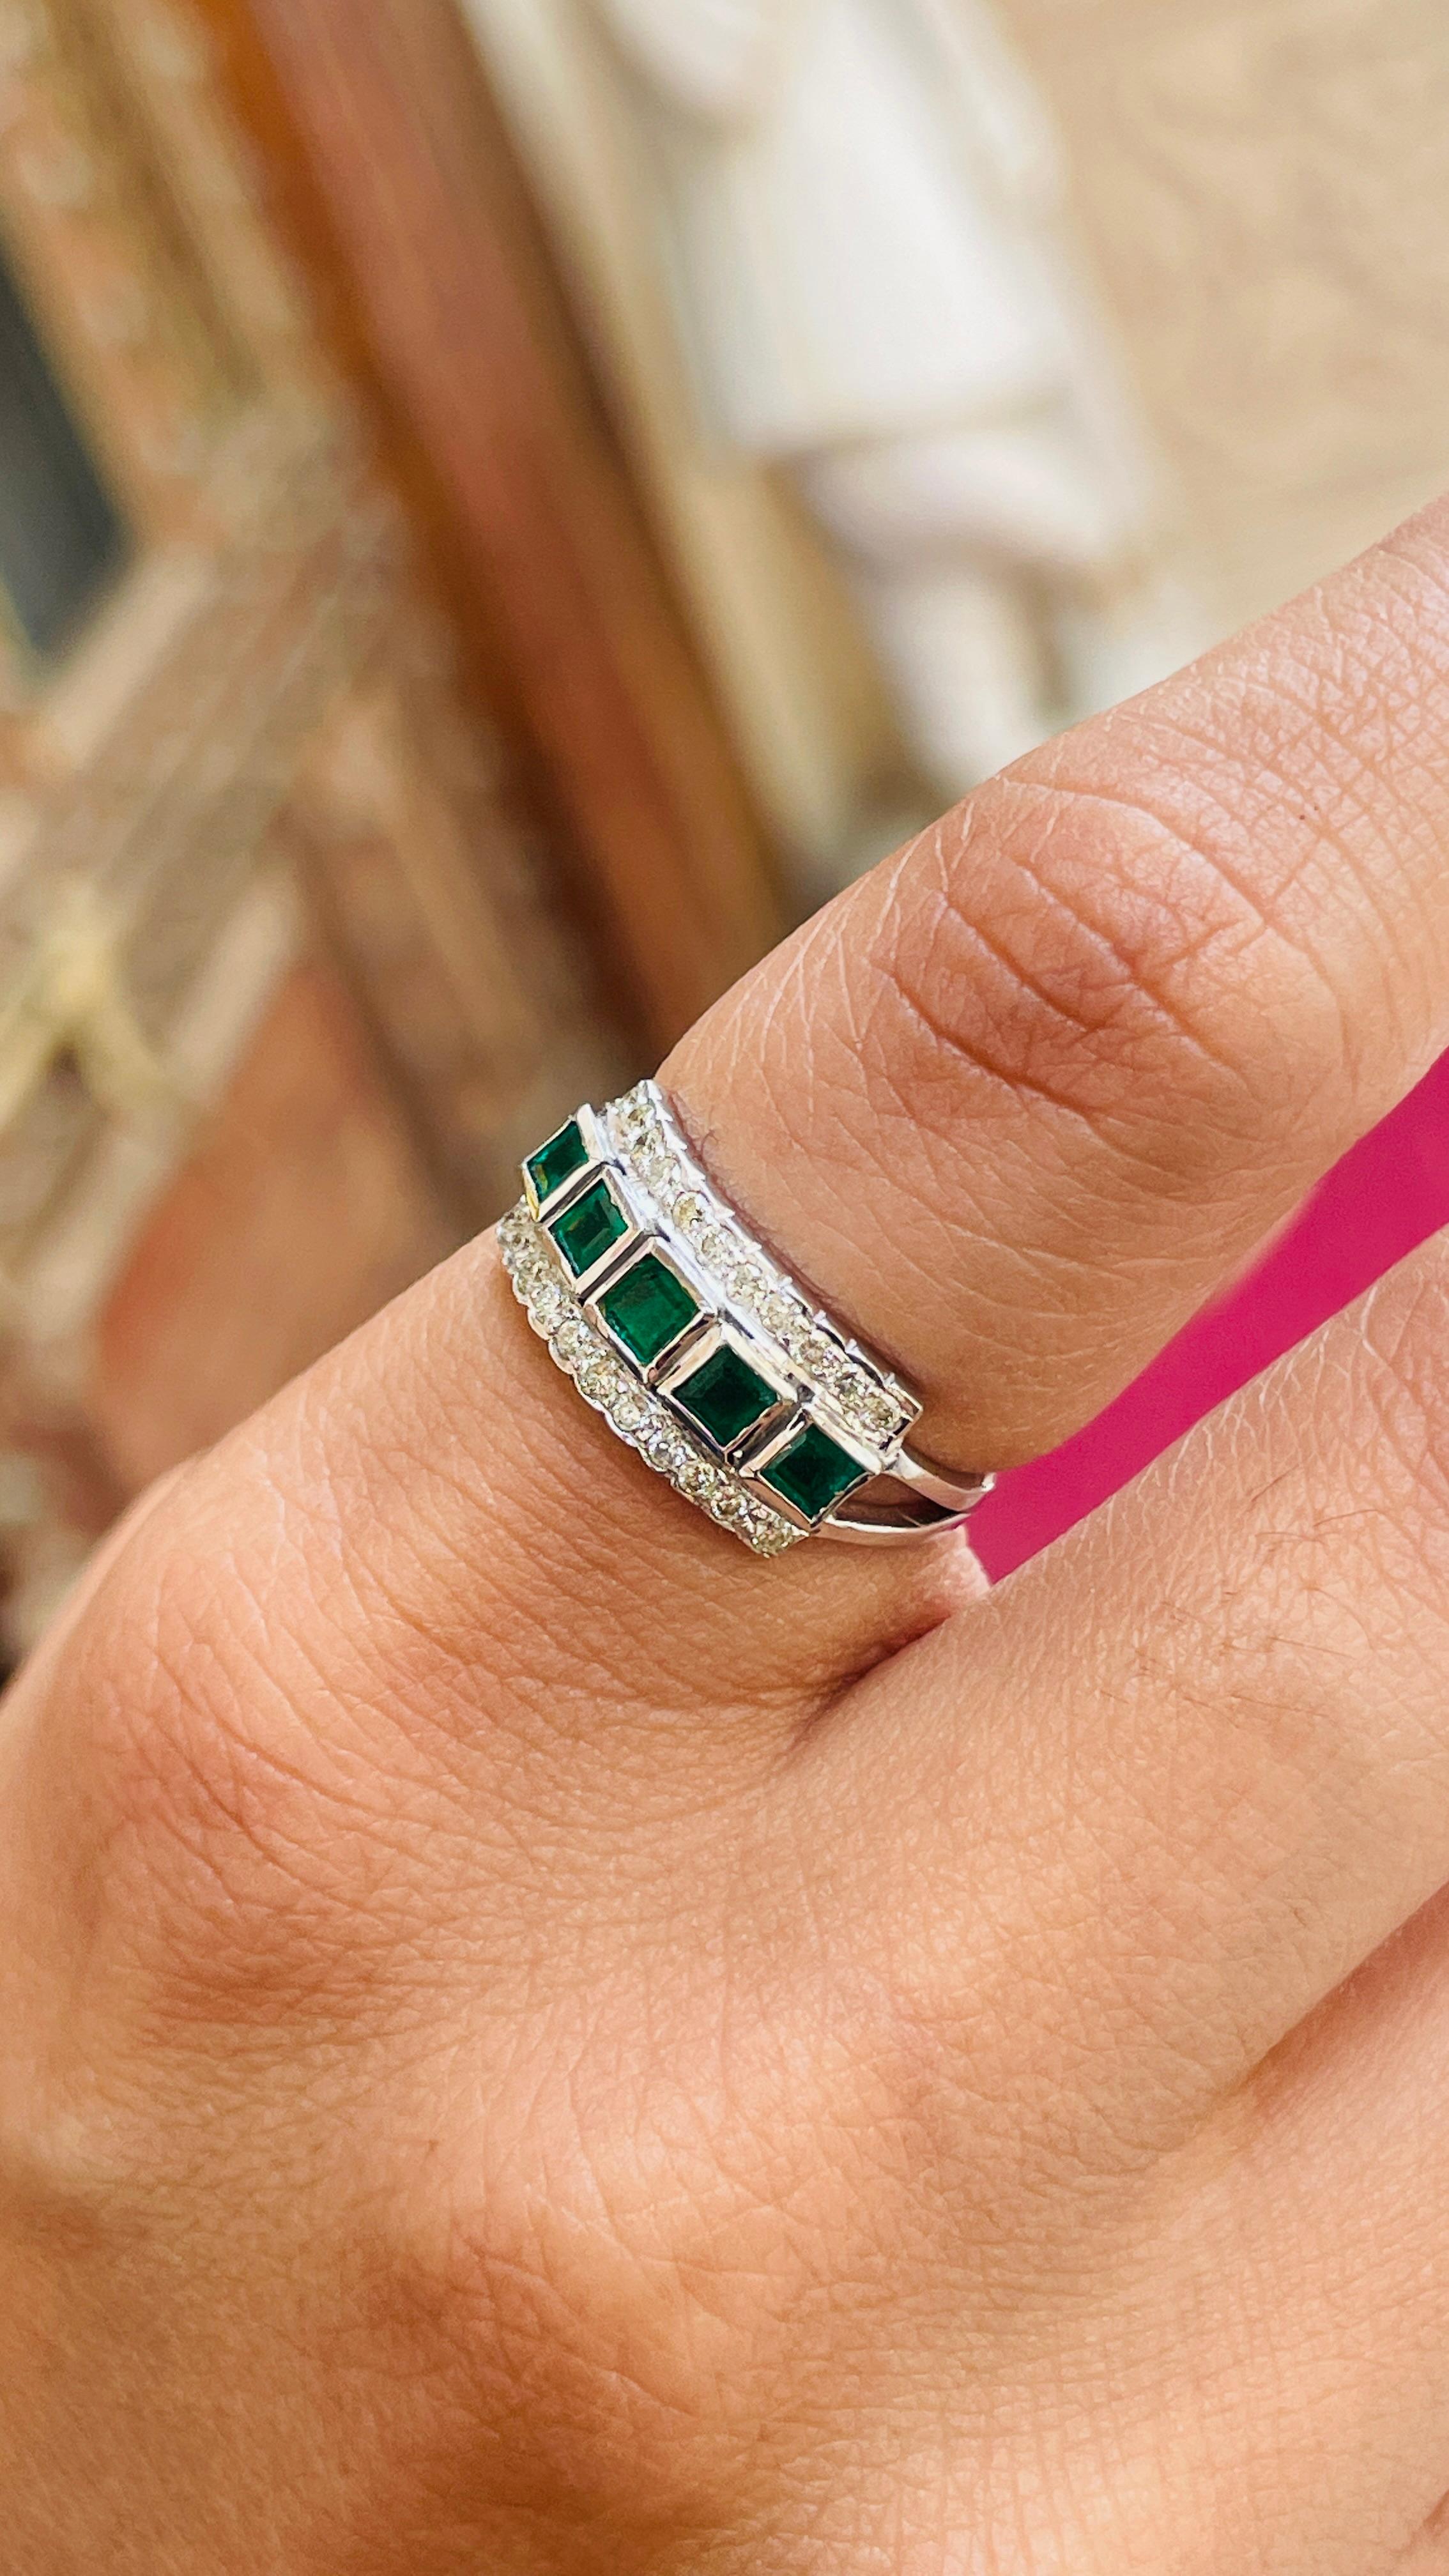 For Sale:  Statement 18k Solid White Gold Square Emerald Diamond Ring 10